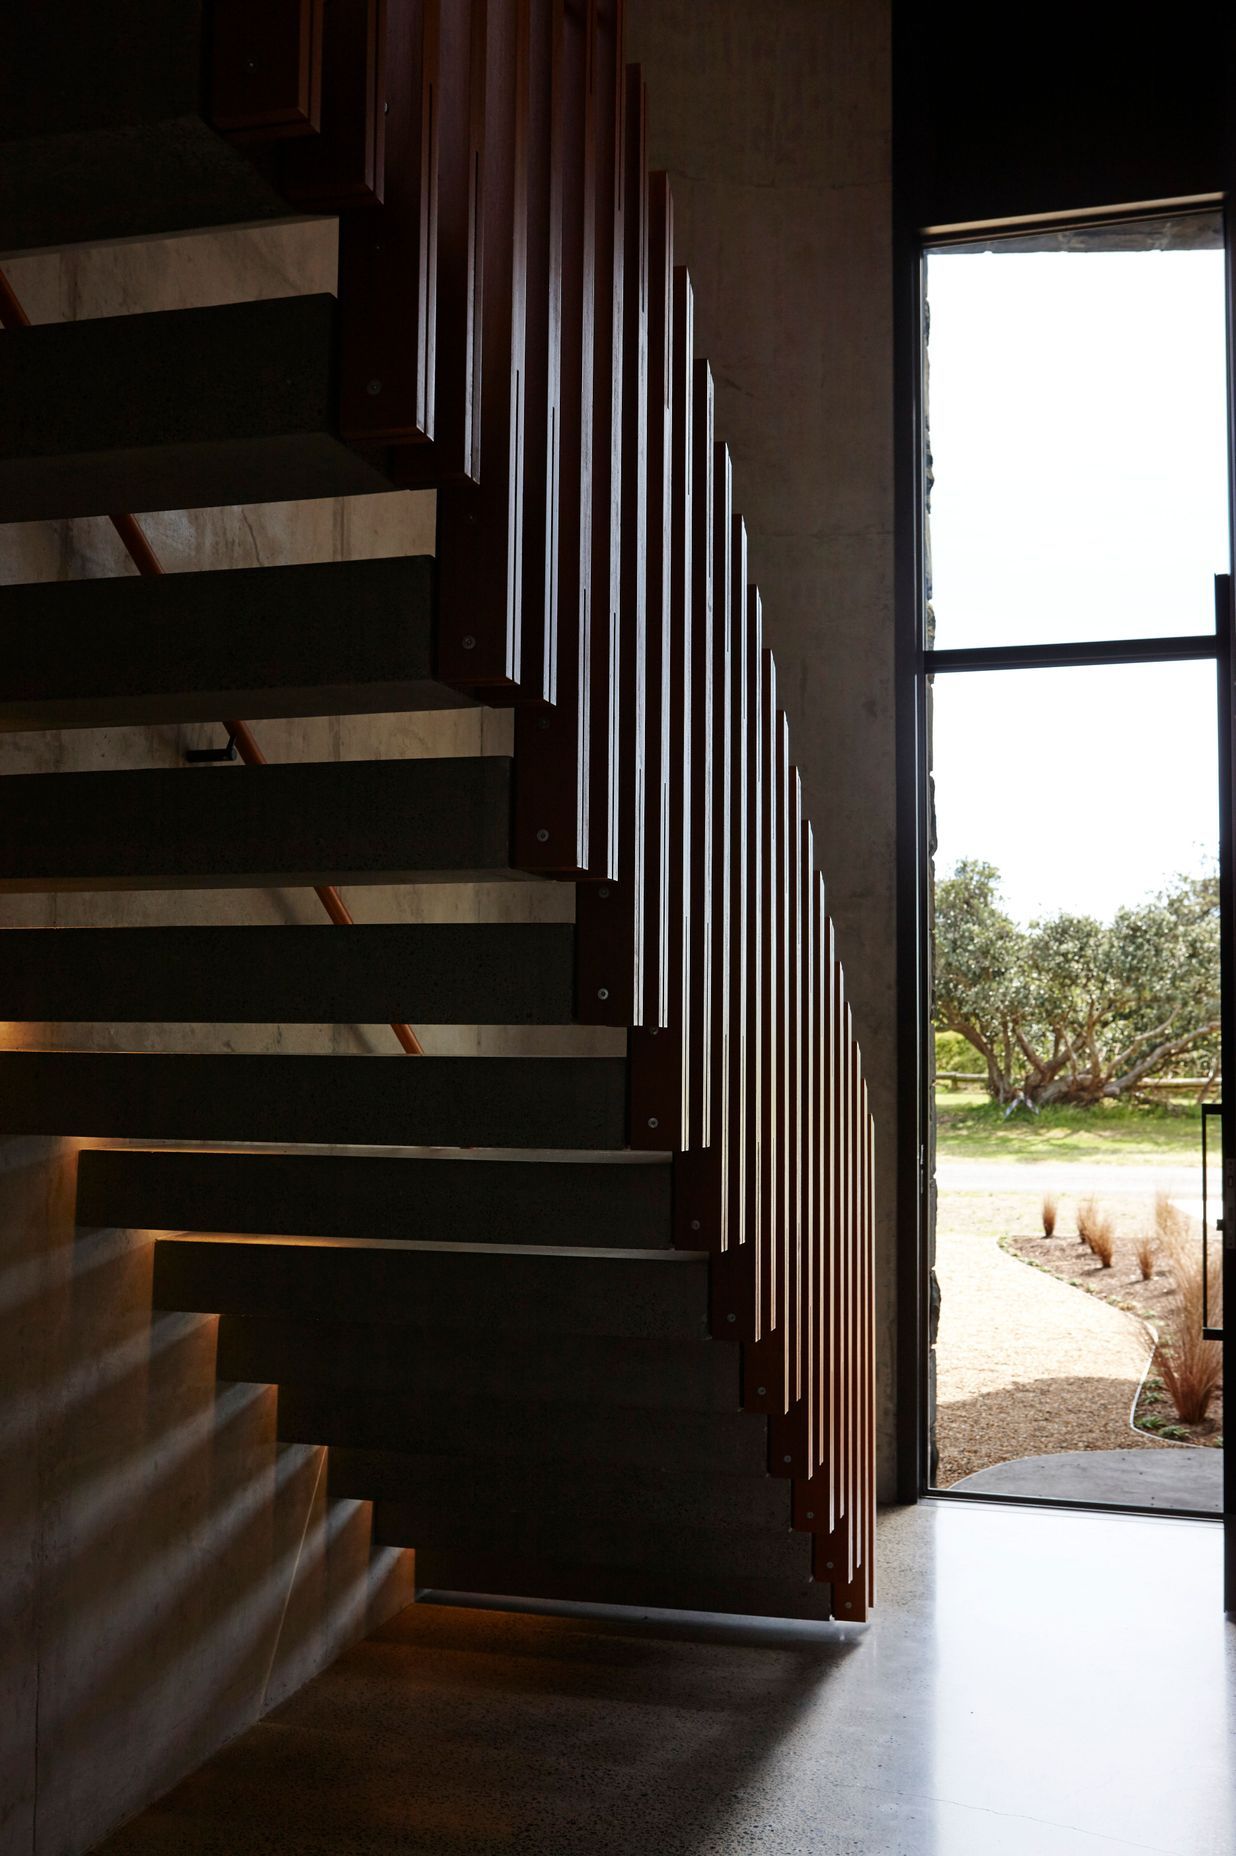 The cantilevered staircase mimics the first floor that juts out over the entry, establishing the interior as an arrangement of complex forms.